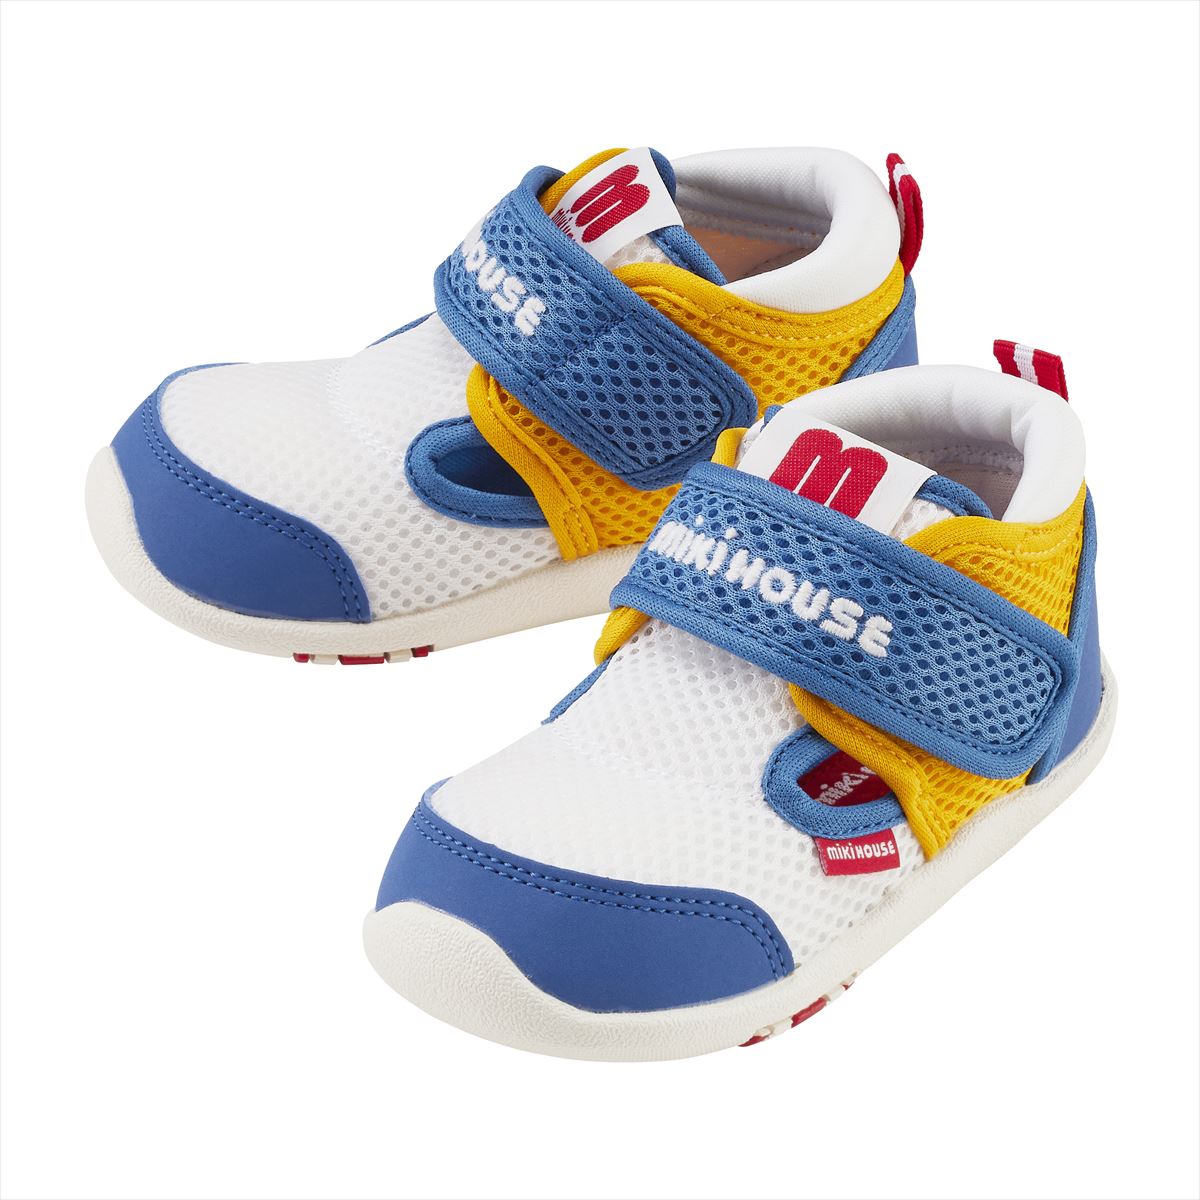 Double Russell Second Shoes - Summer Breeze